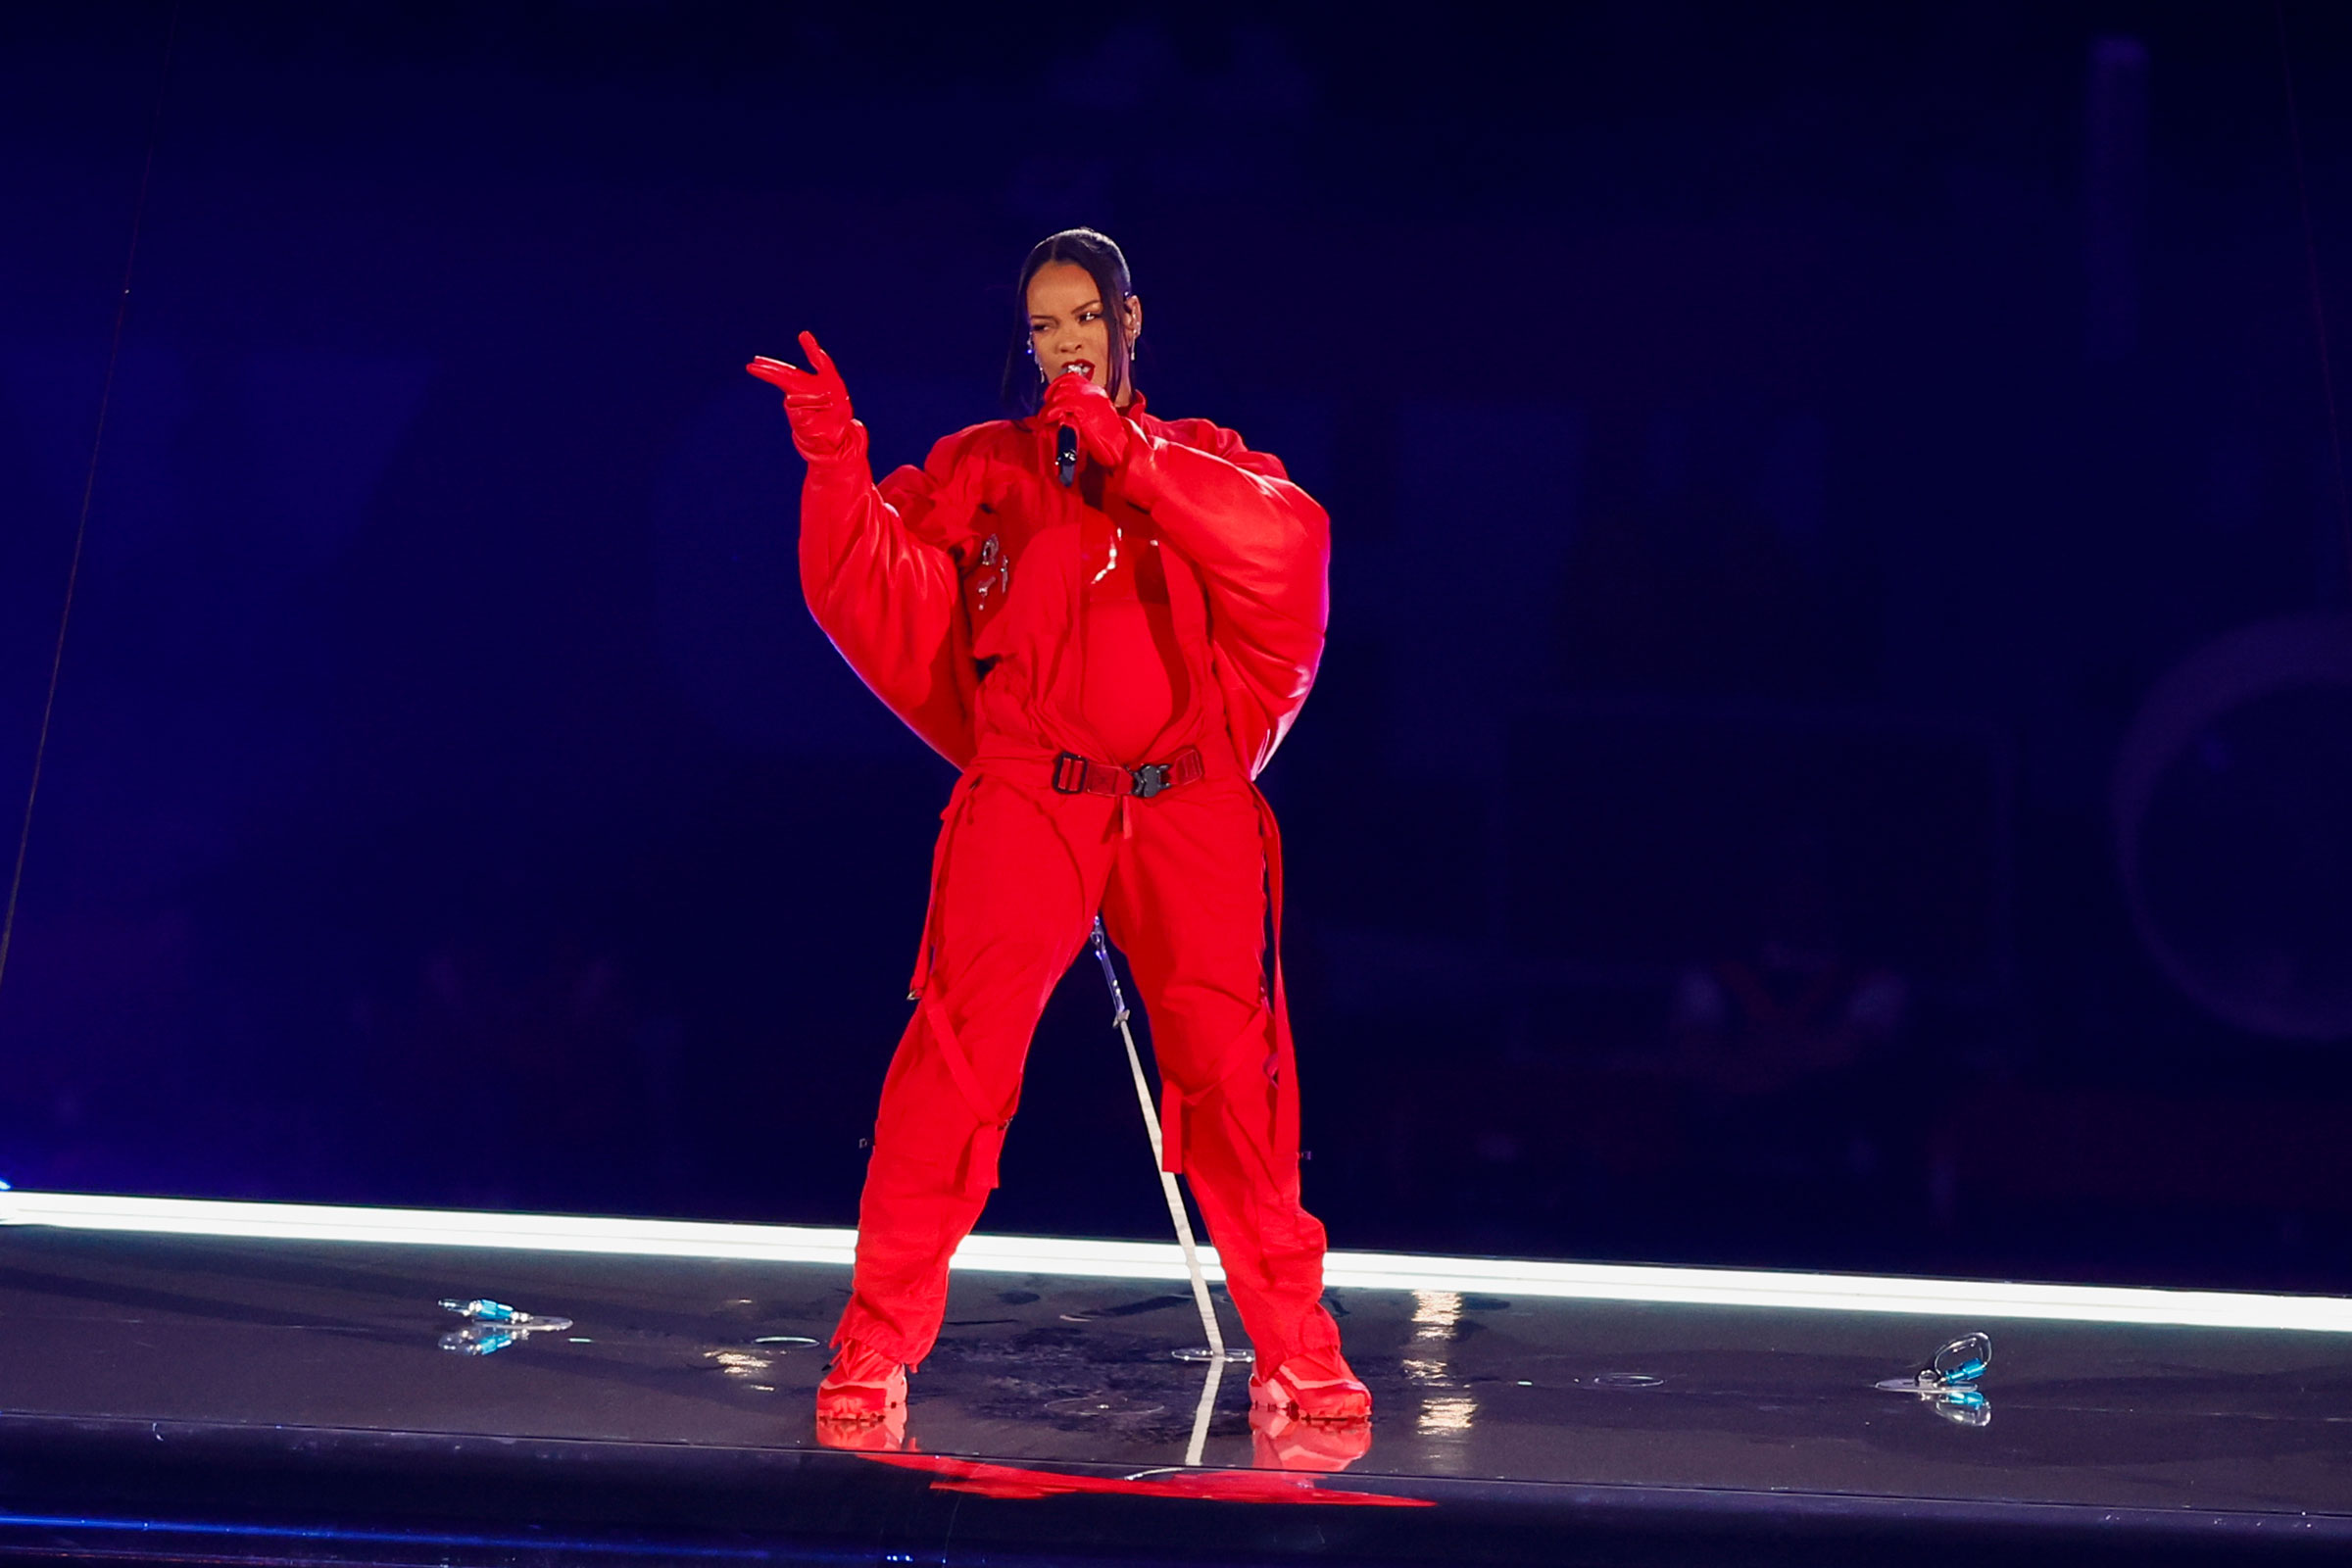 Rihanna performs during the Apple Music Super Bowl LVII Halftime Show